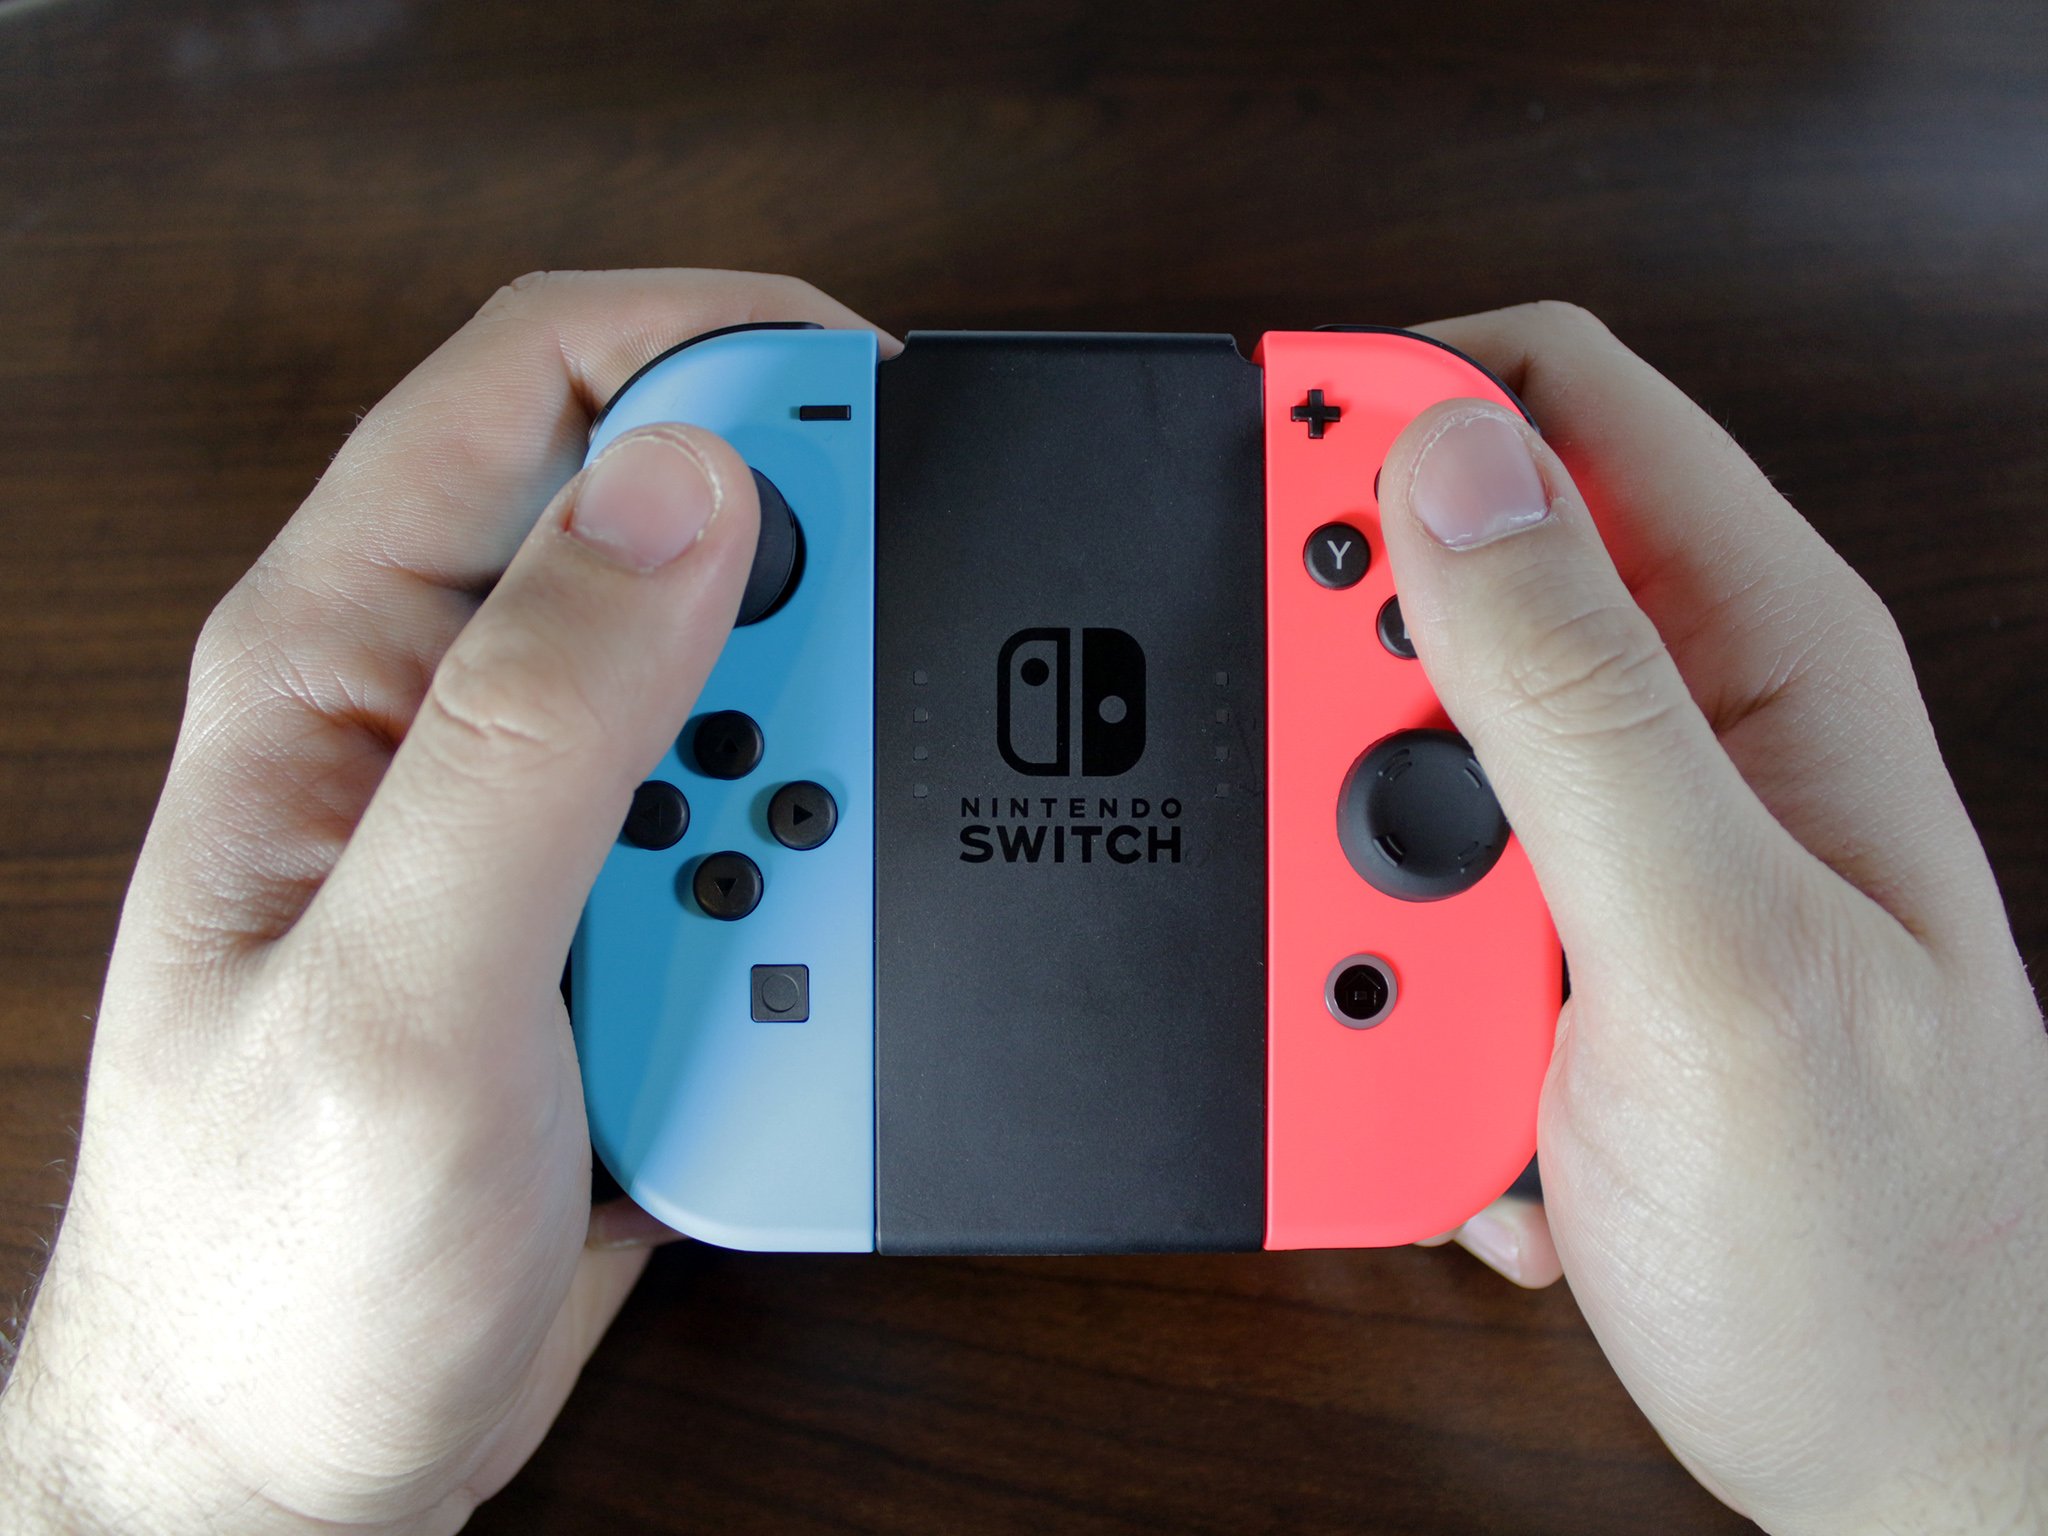 How to pair a new Joy-Con to the Nintendo Switch | iMore